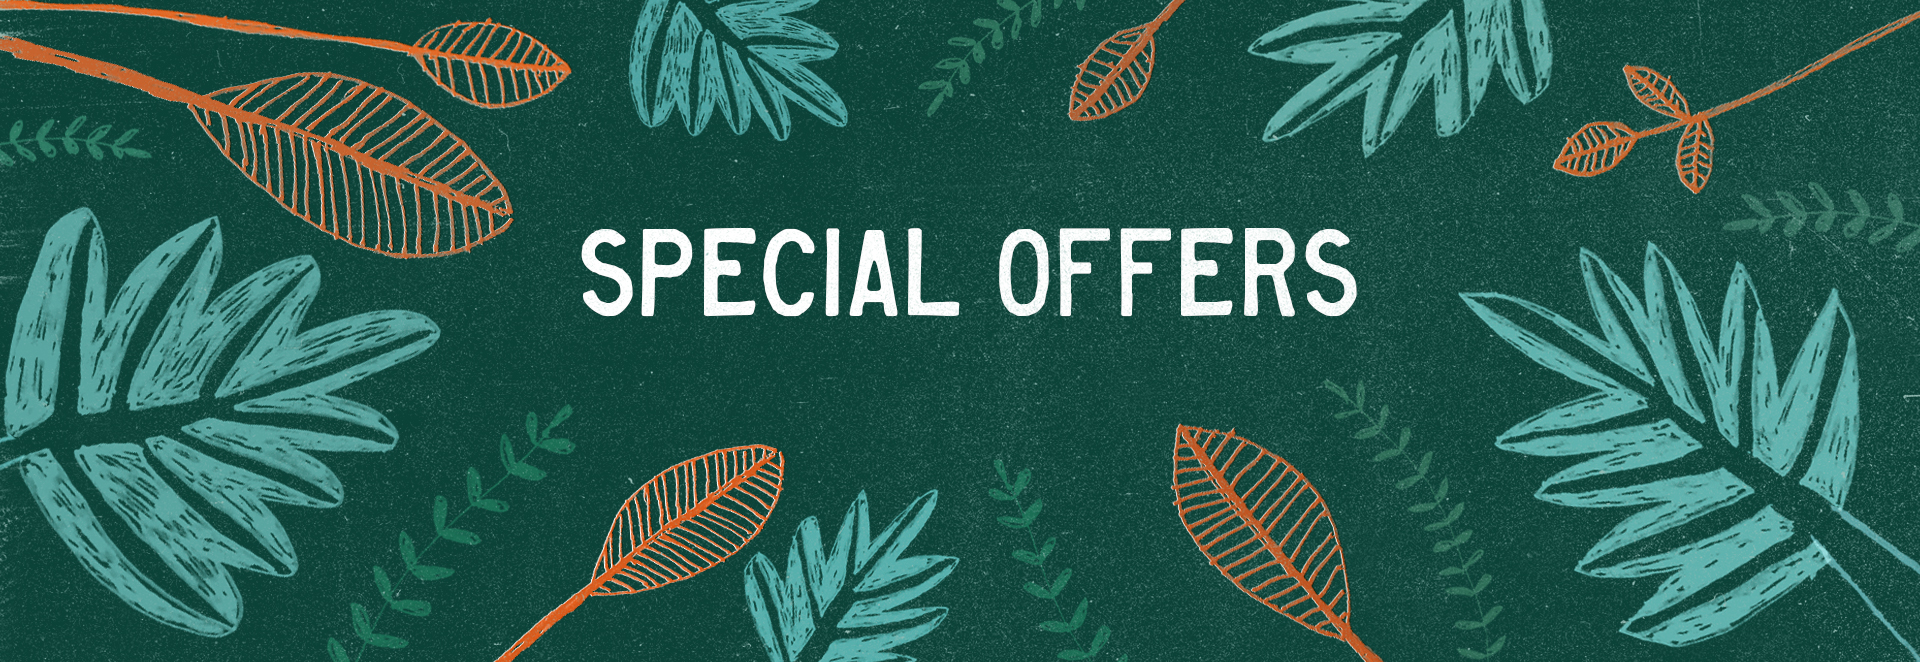 special-offers-tag-banner